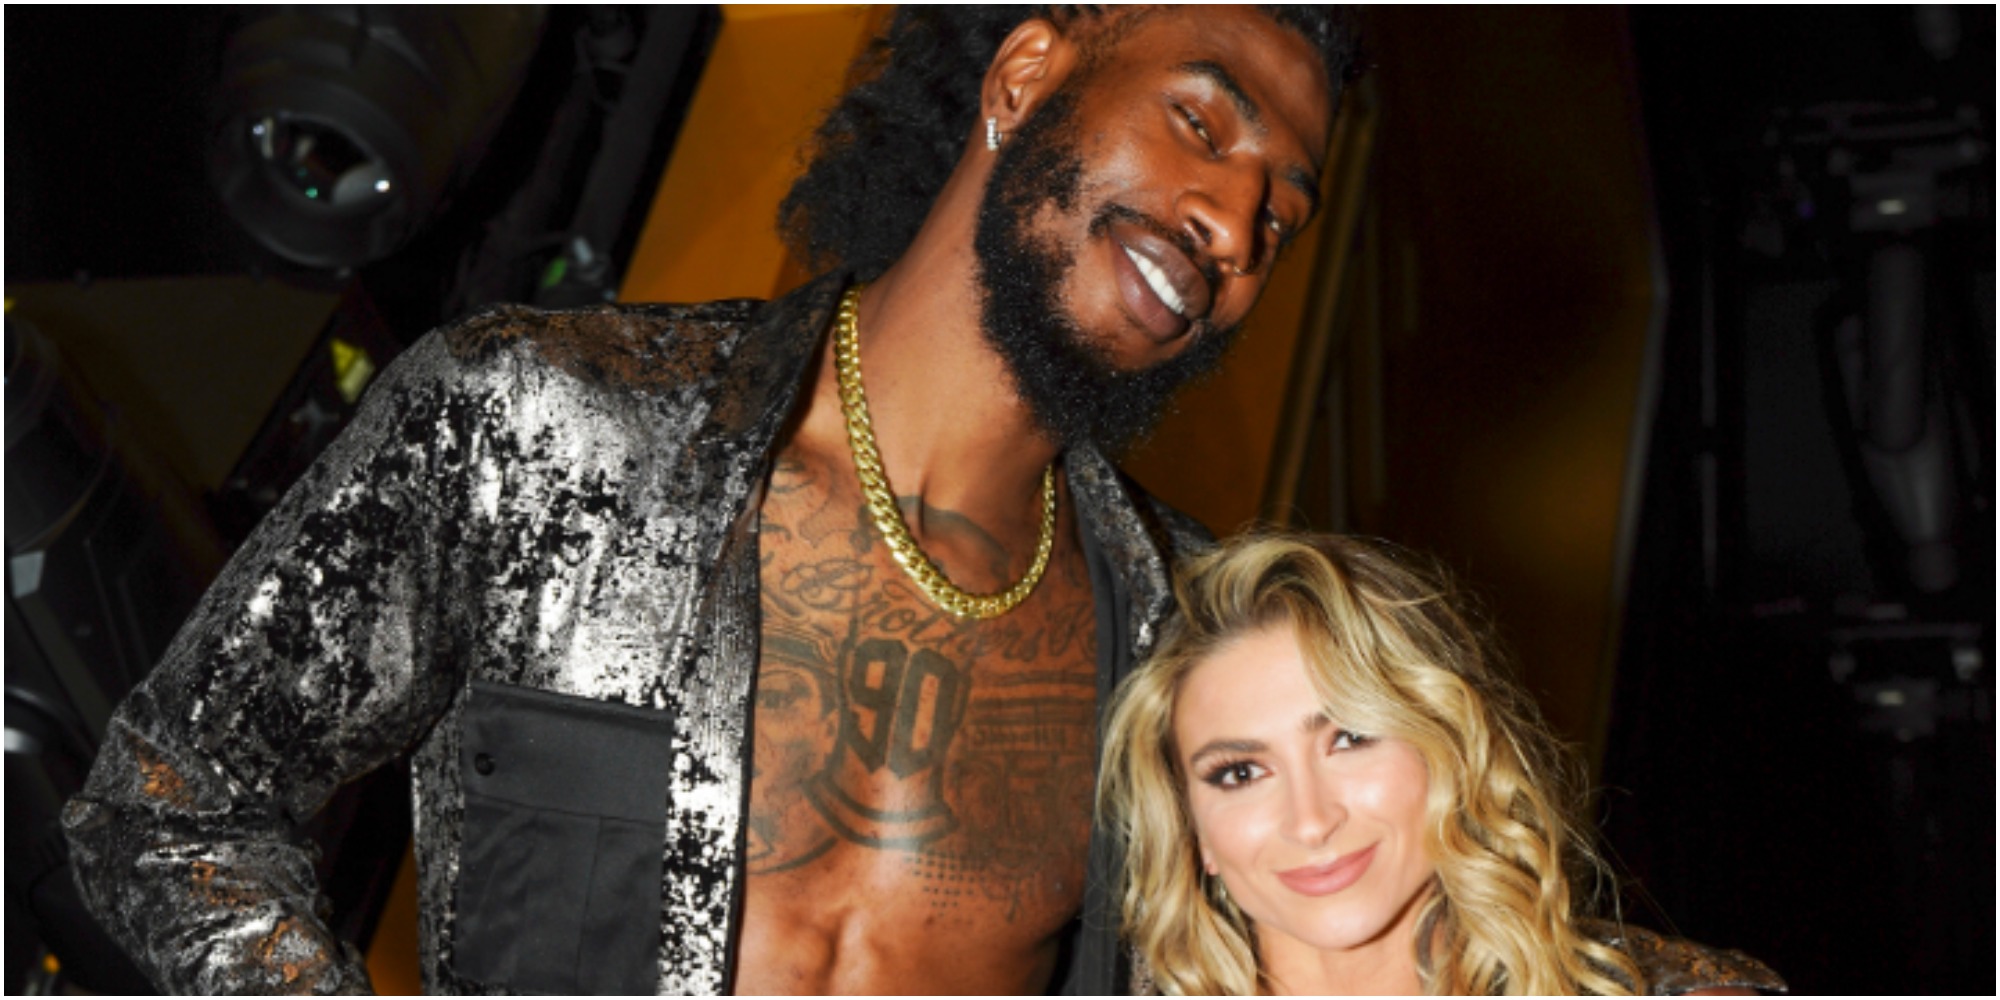 Iman Shumpert and Daniella Karagach are finalists on Dancing with the Stars.